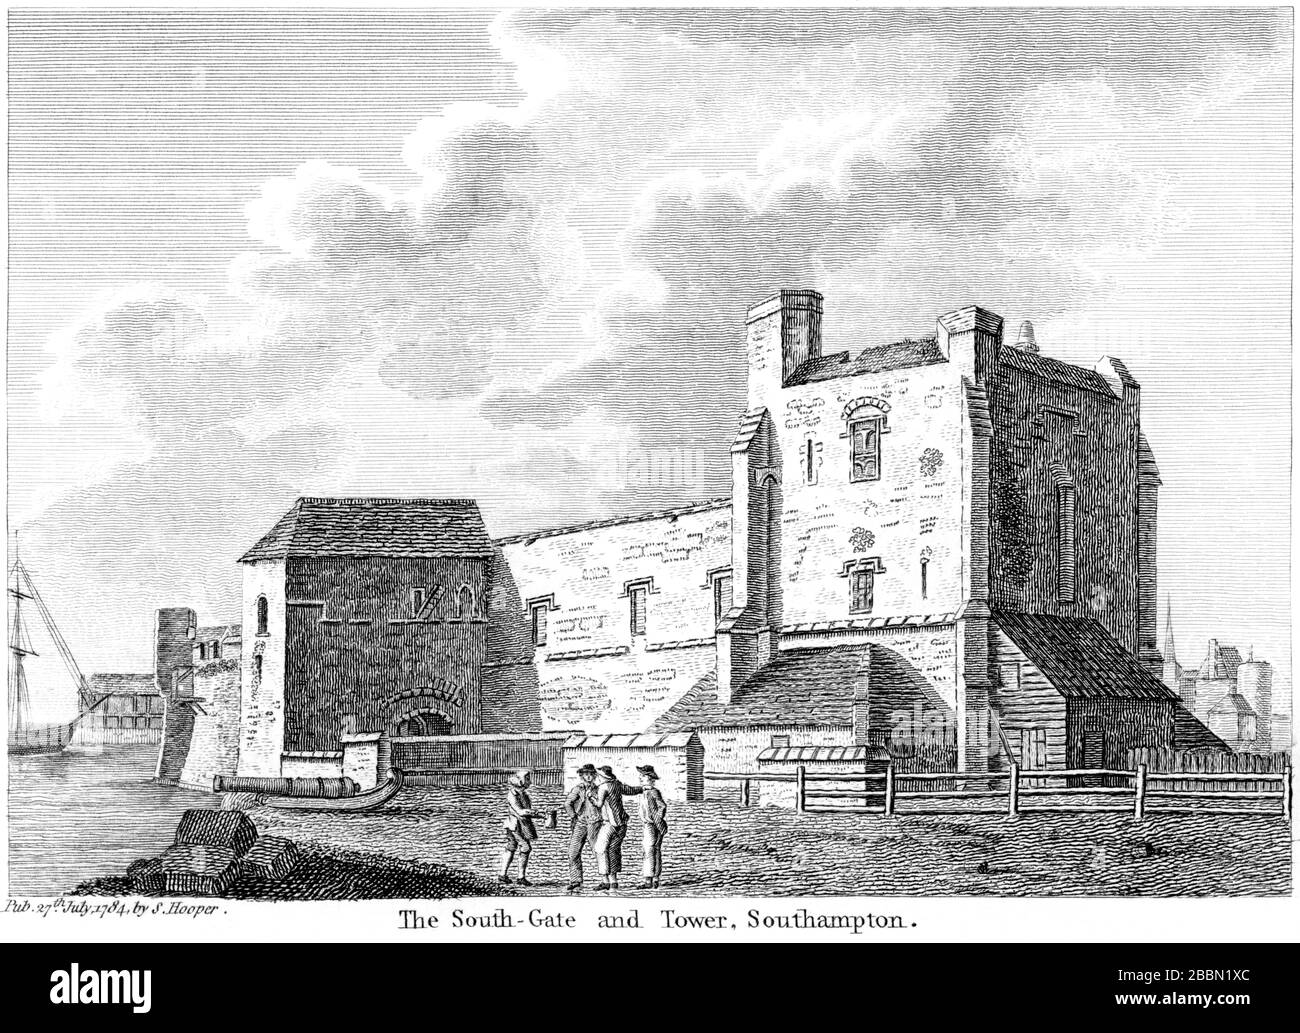 An engraving of the South-Gate and Tower, Southampton 1784 scanned at high resolution from a book published around 1786. Believed copyright free. Stock Photo